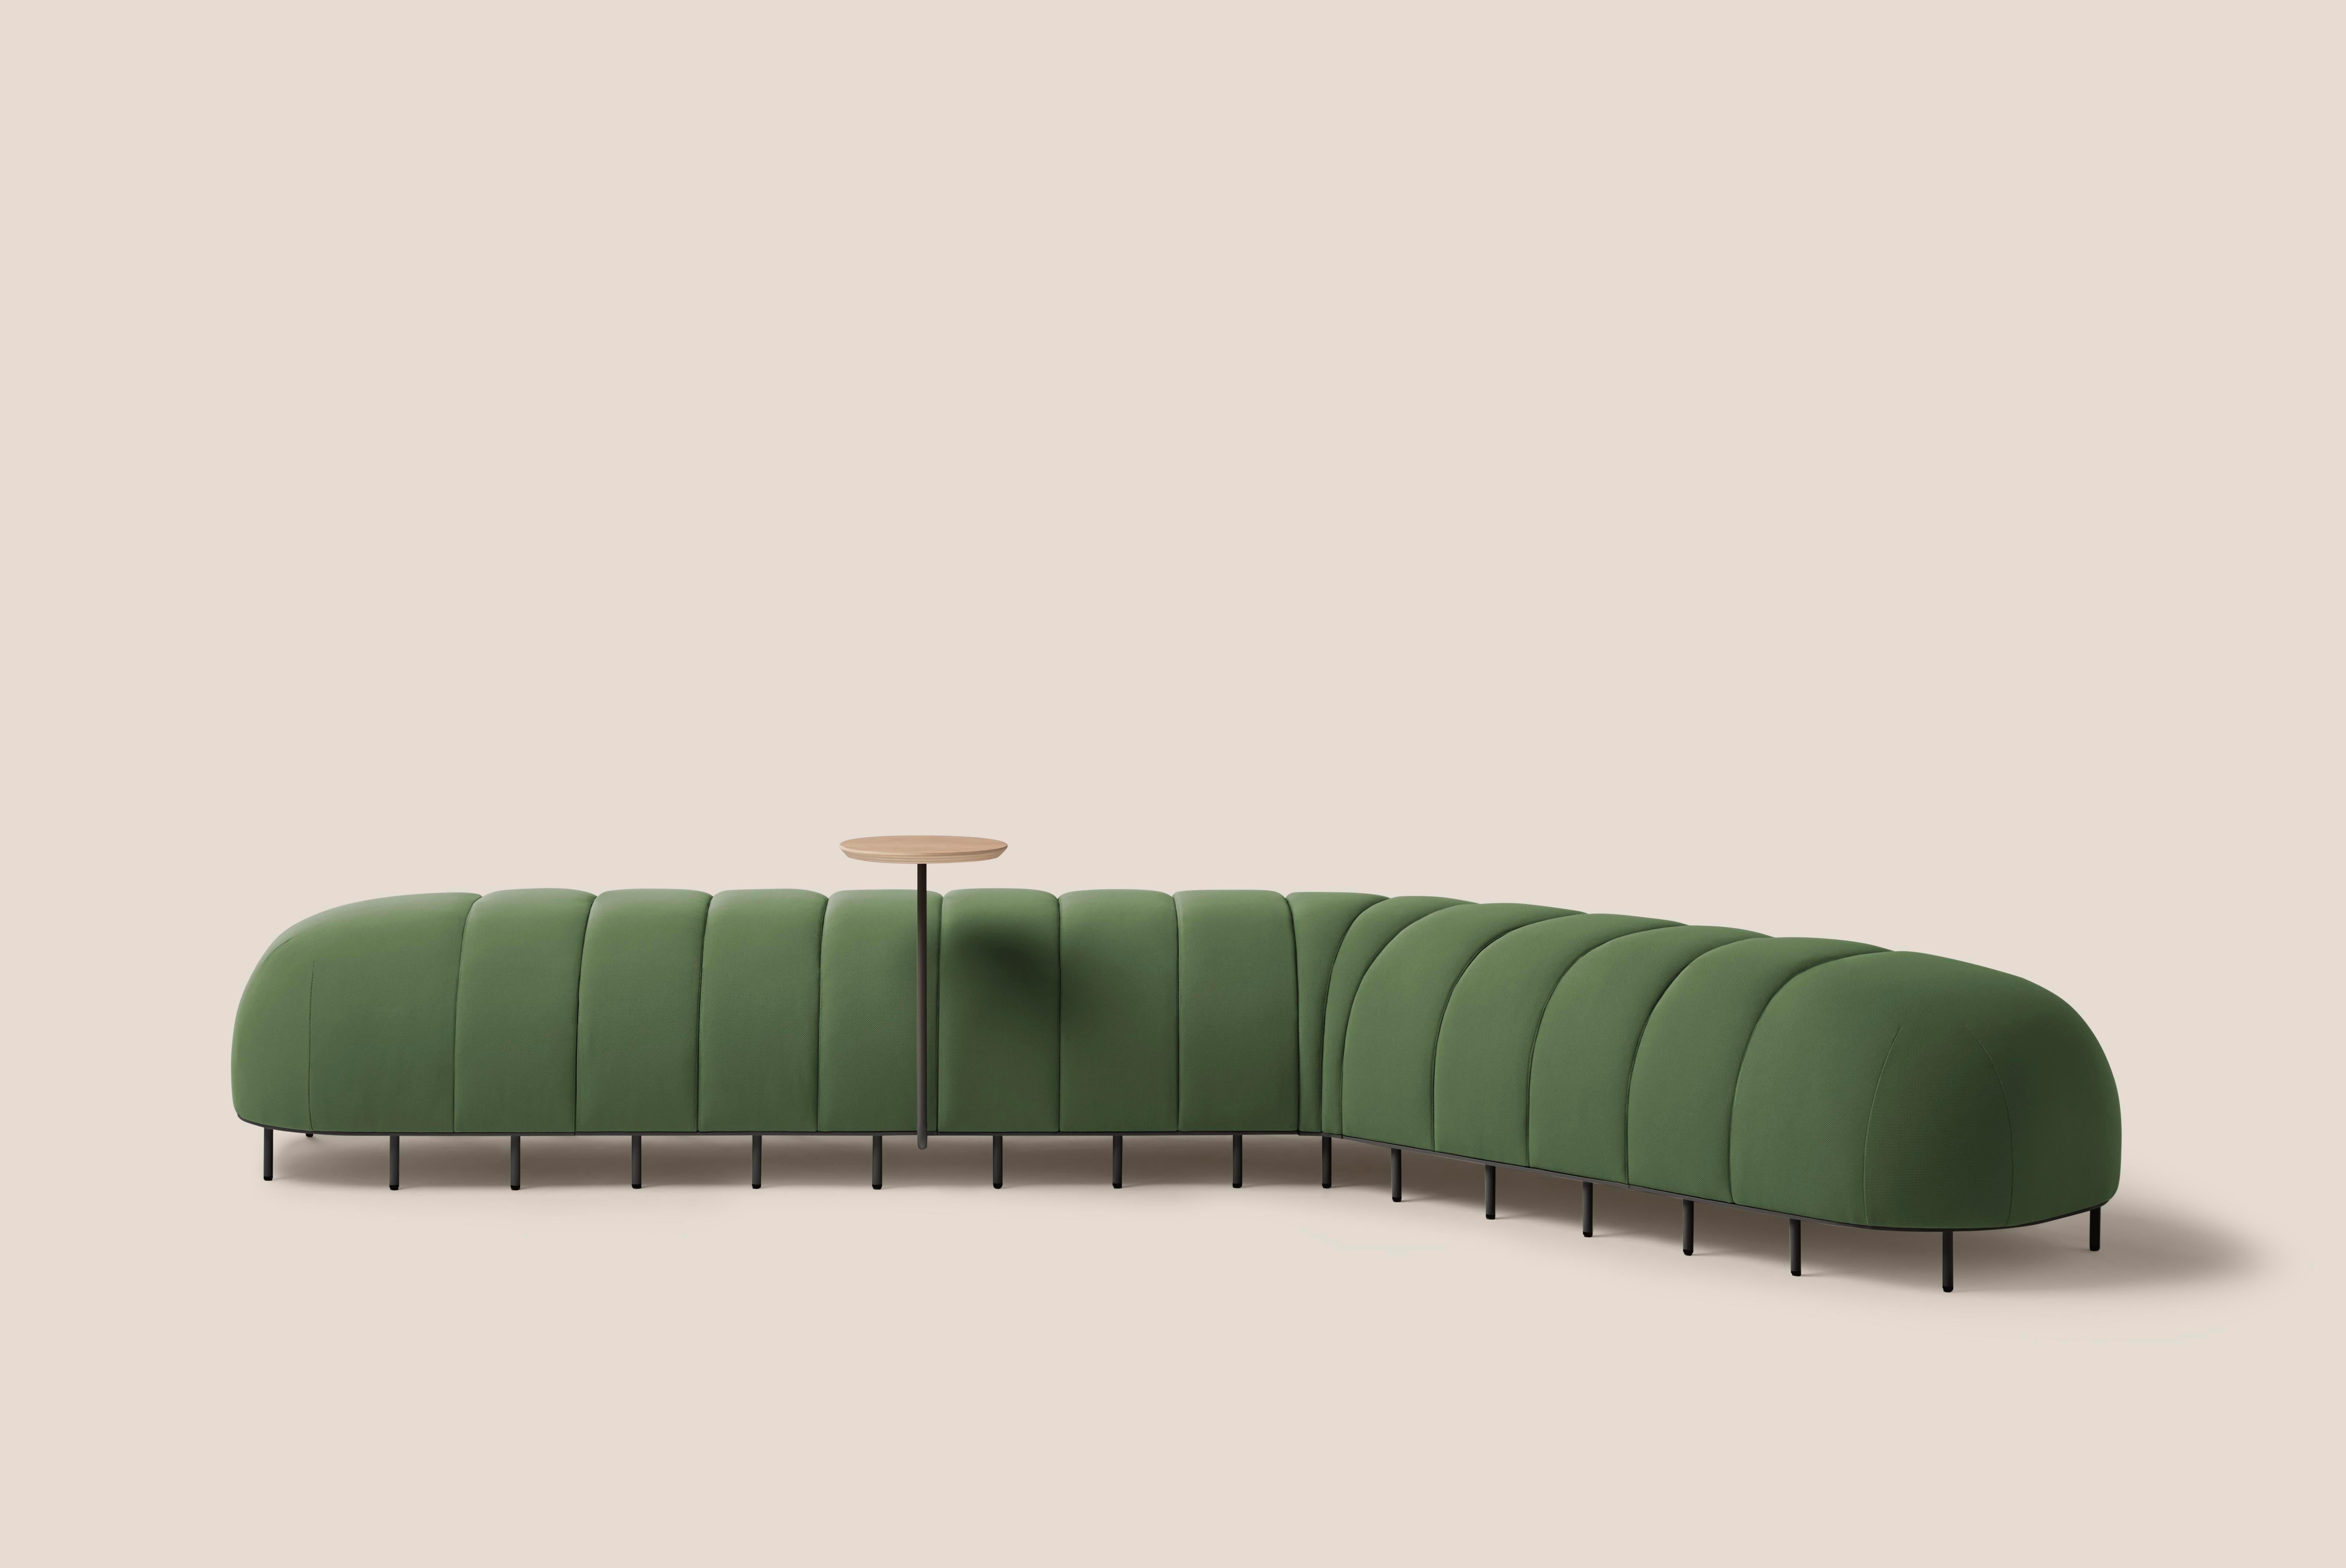 Green Worm bench V by Pepe Albargues
Dimensions: D 65 x W 280 x H 50 cm
Materials: Plywood, foam CMHR, iron
Available in different colors. Custom modules convinations available

1 x curved module
3 x straight module
2 x end module
1 x side